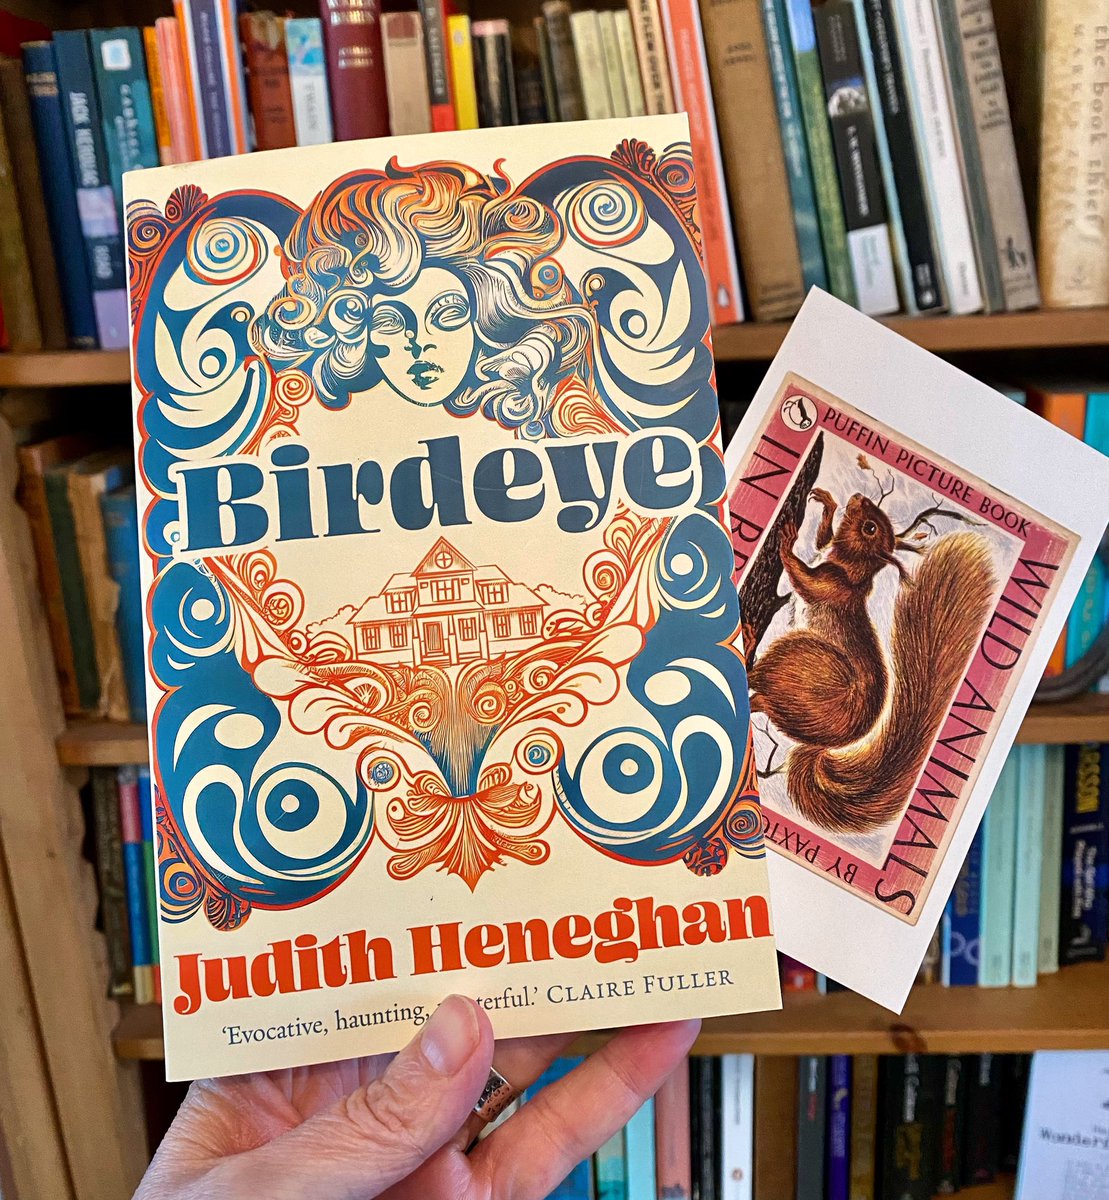 I’ve been on a trip to the Catskills with #Birdeye, @JudithHeneghan phenomenal second novel. 📚❤️

I’ll be talking with Judith at @GoldfinchBooks_ on 22nd May. Tickets are free.

#birdeye @saltpublishing #catskills #mountains #america #newyork #retreat #commune #authortalk